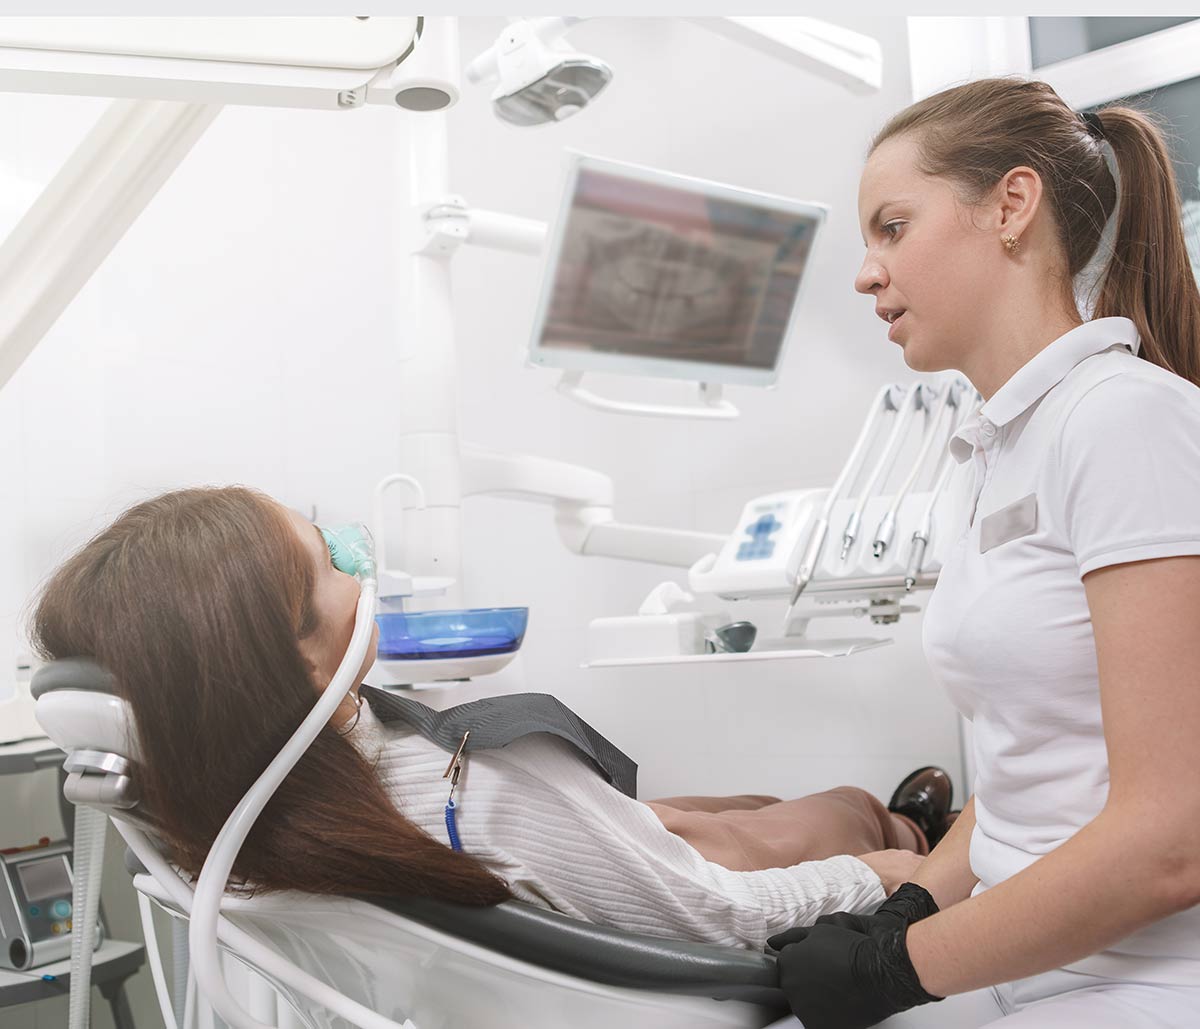 Overcome dental anxiety and fear with sedation dentistry at Dentistry at LaSalle in Burlington, Ontario.